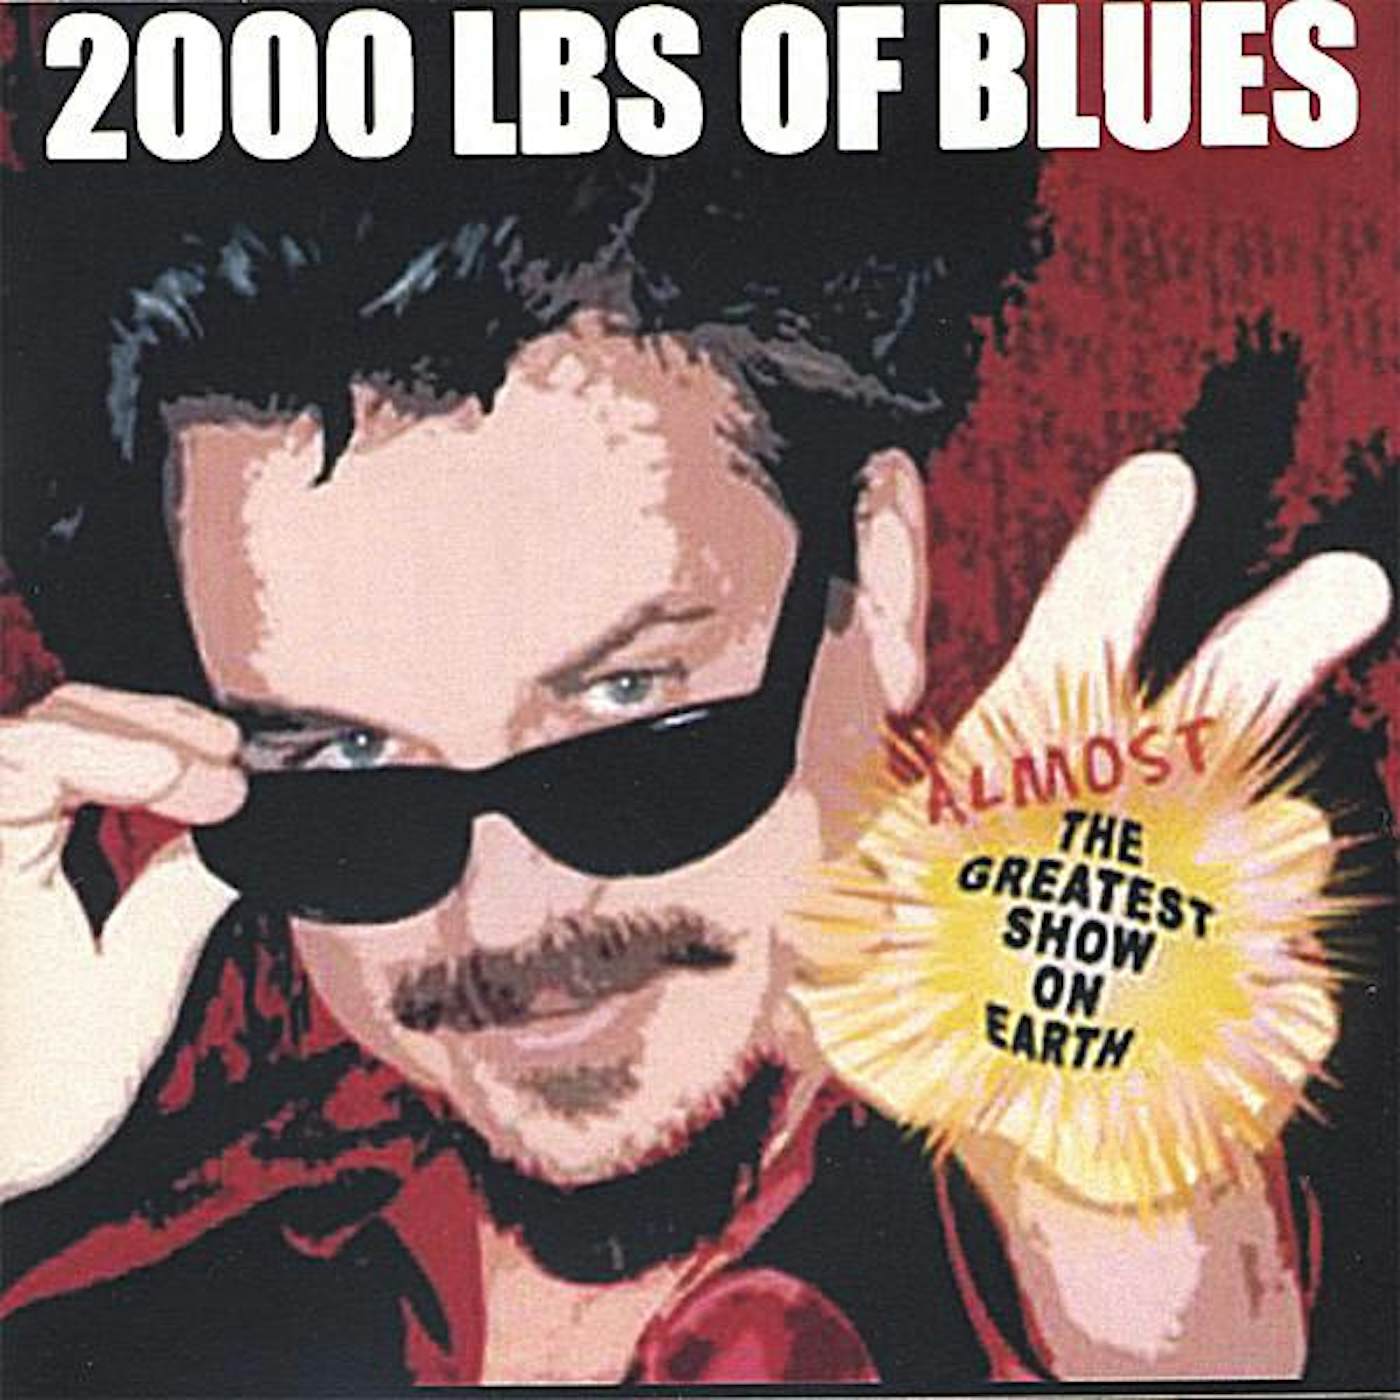 2000 Lbs of Blues ALMOST THE GREATEST SHOW ON EARTH CD